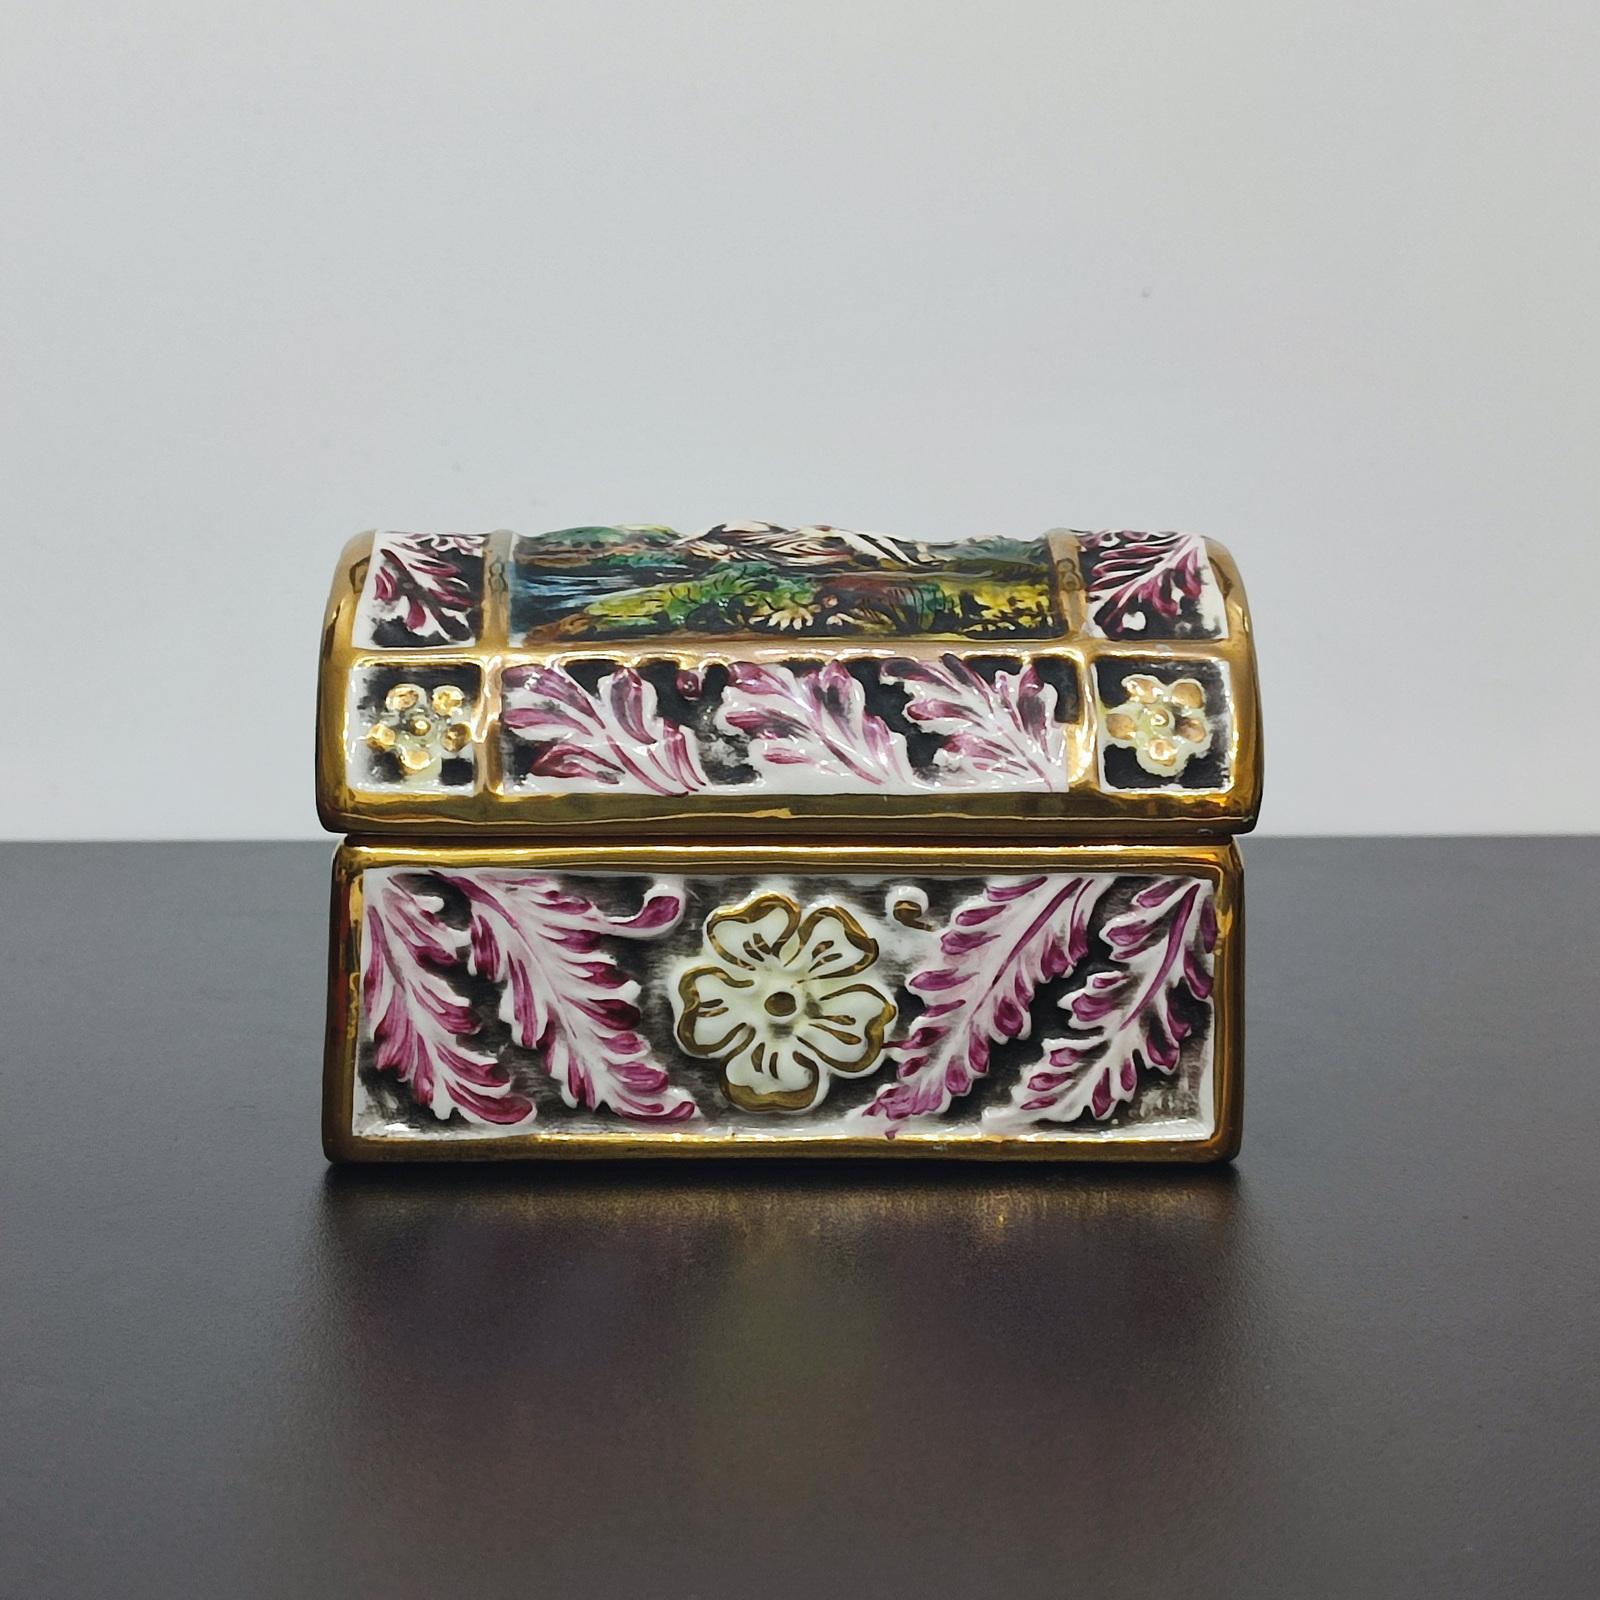 A Mid 20th Century beautiful Capodimonte Porcelain Chest or Jewelry Box
Glazed Porcelain with mark on the base.
Chest with a rectangular base with a domed lid, decorated with a galante scene.
The sides decorated with relief floral designed, enhanced